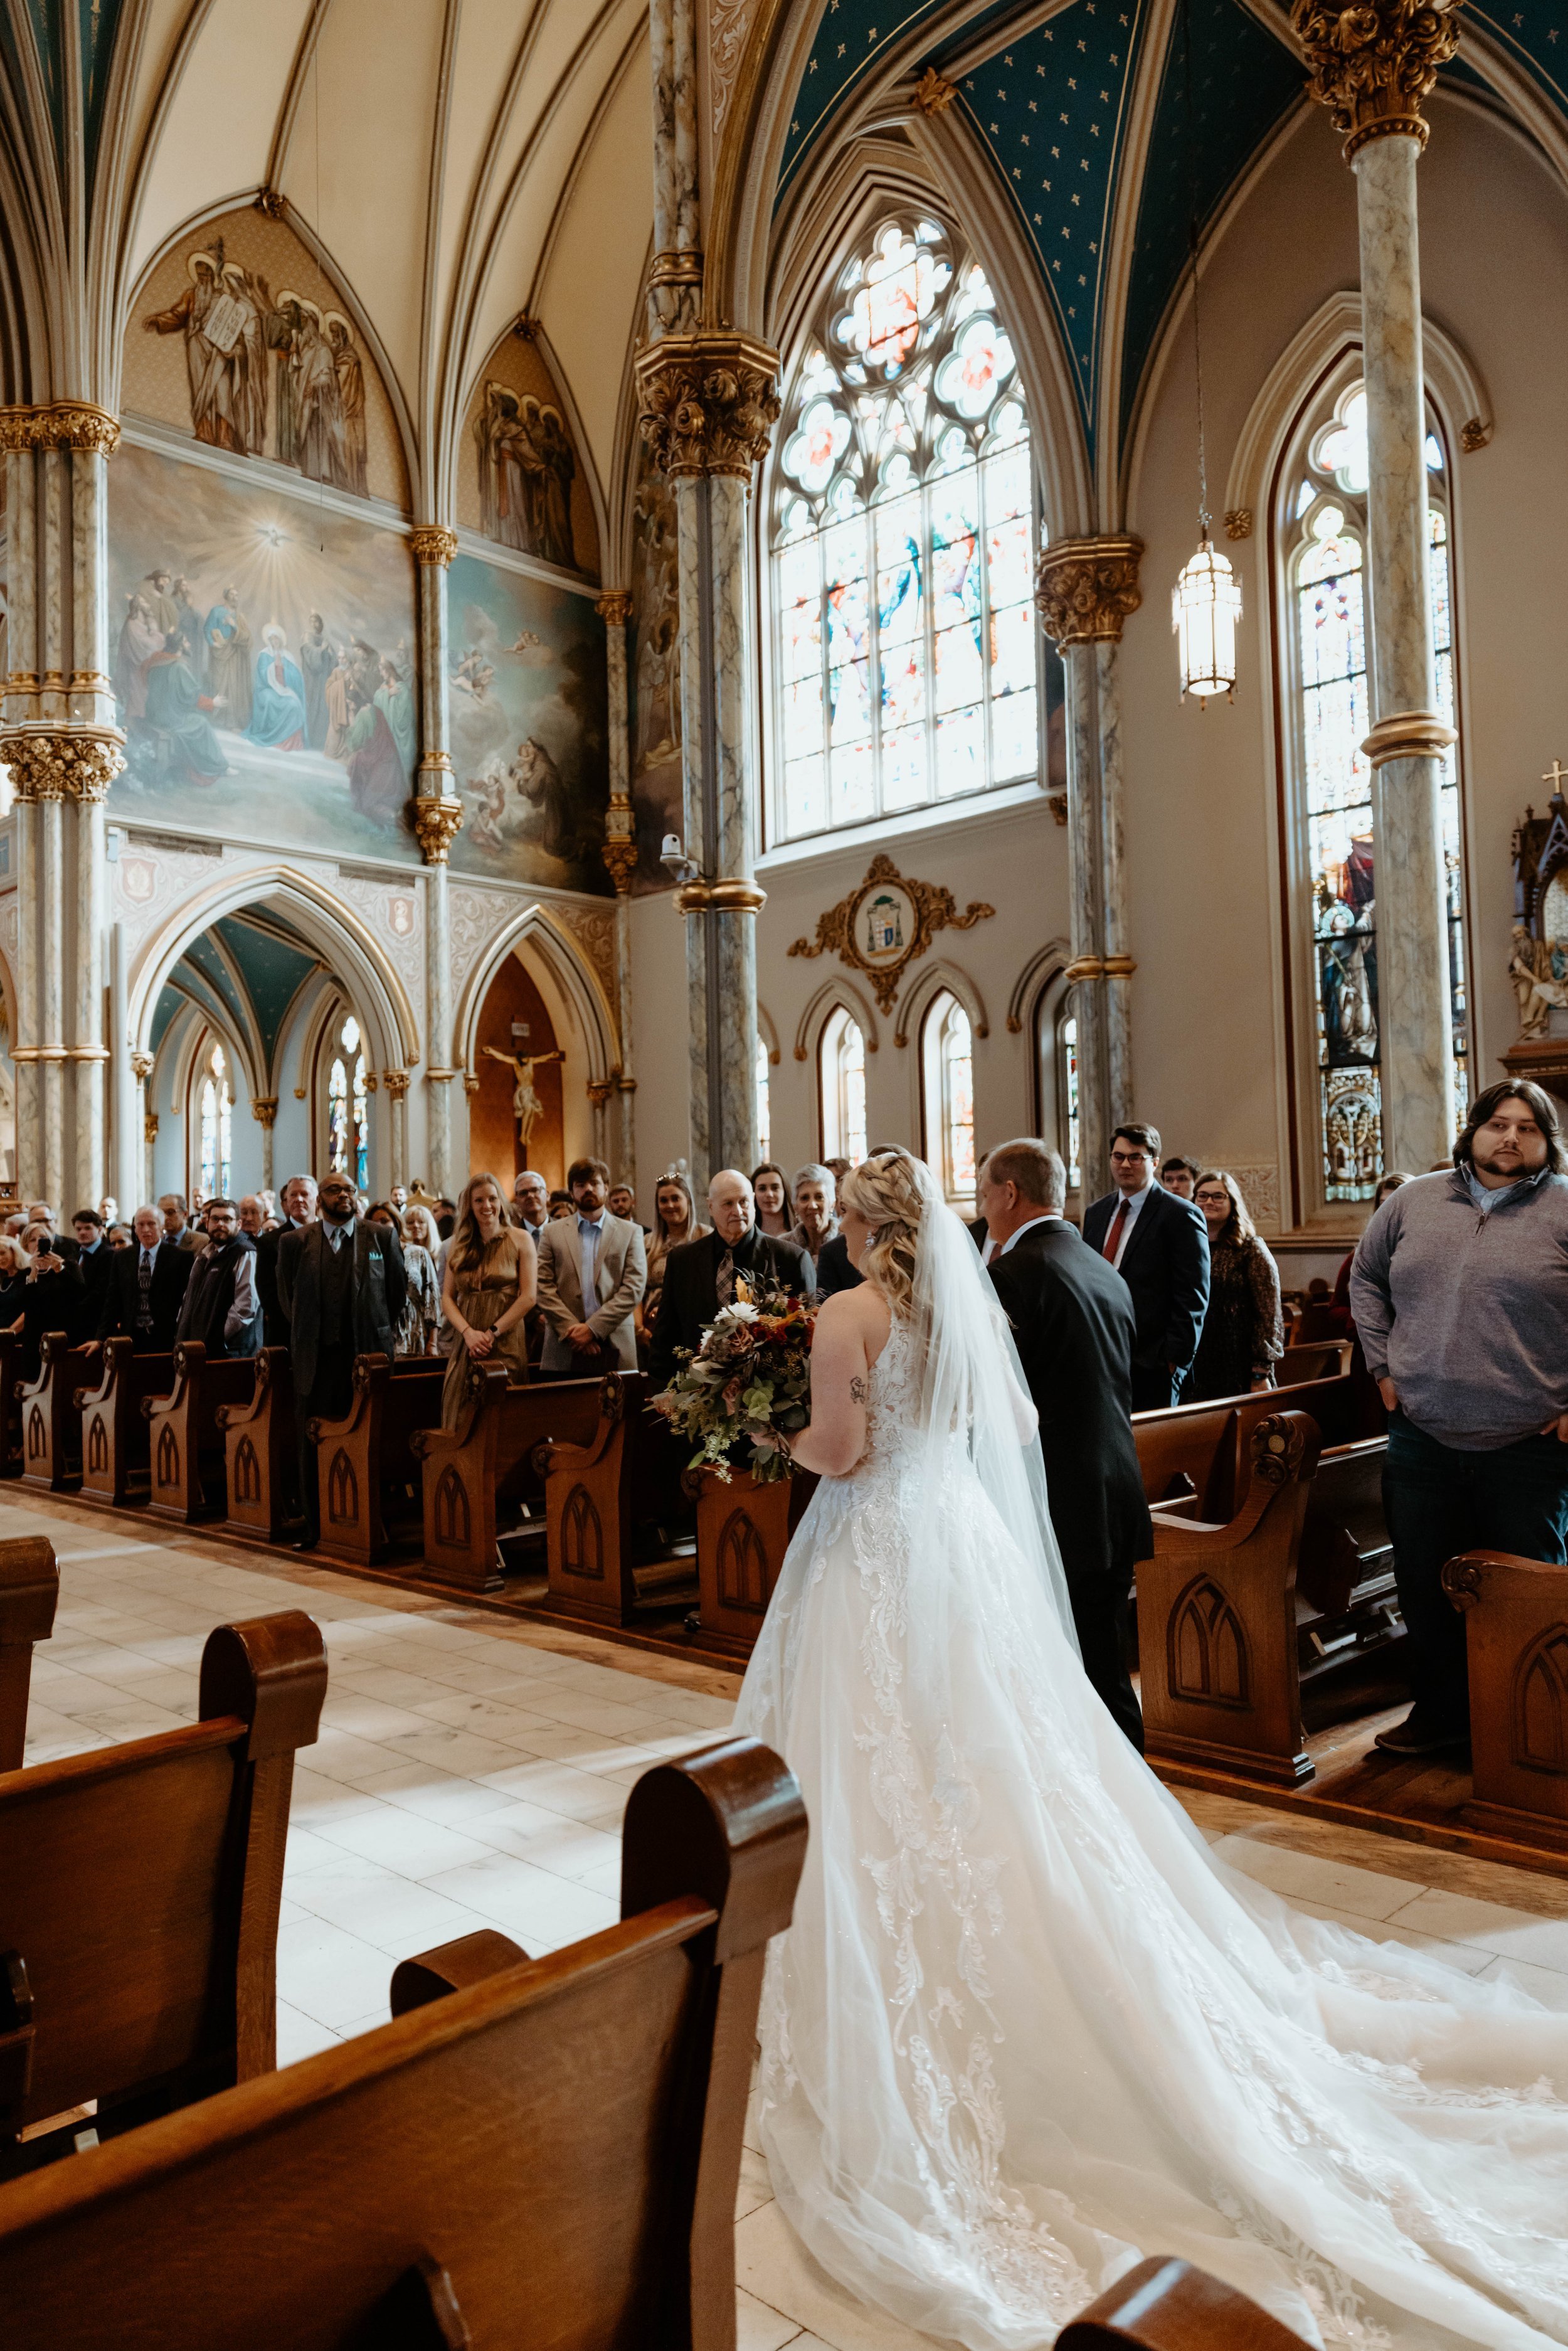 Ivory-and-beau-bride-ansley-bought-sparkly-and-traditional-highneck-ballgown-at-savannah-bridal-shop-gets-married-at-cathedral-with-the-help-of-ivory-and-beau-who-created-floral-peices-for-the-ceremony-and-reception-in-their-savannah-florwer-shop-38.jpg